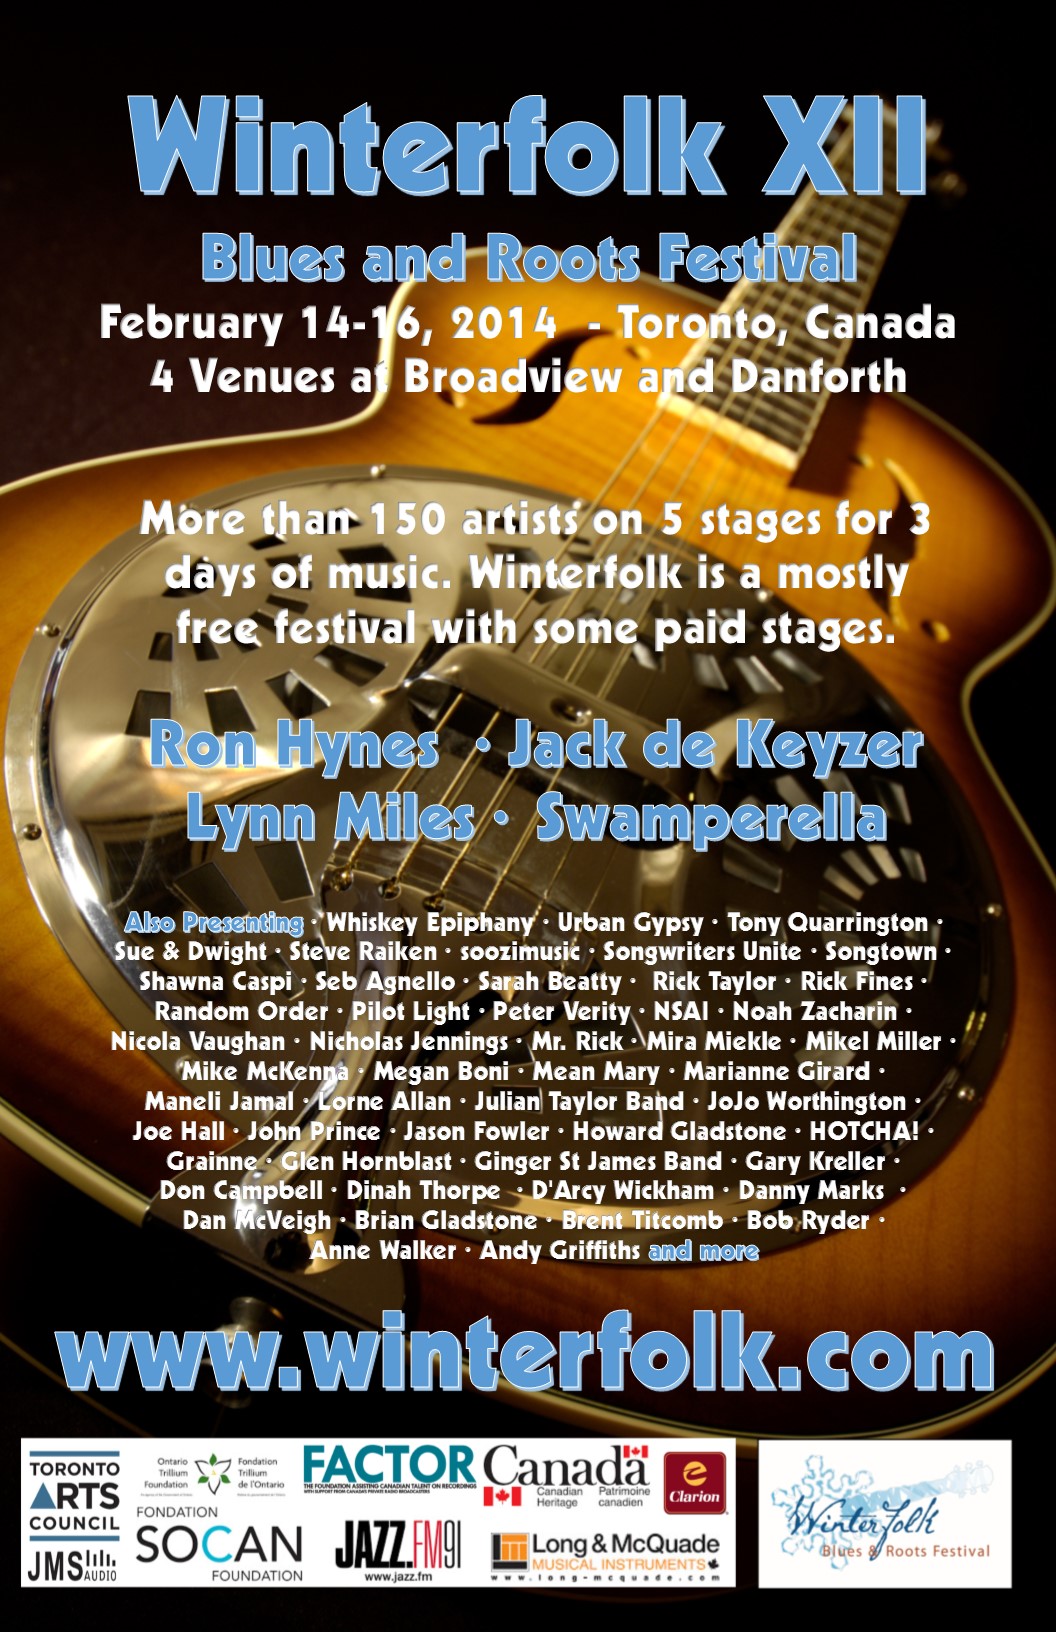 Winterfolk Blues and Roots Festival returns to west end of Danforth Avenue